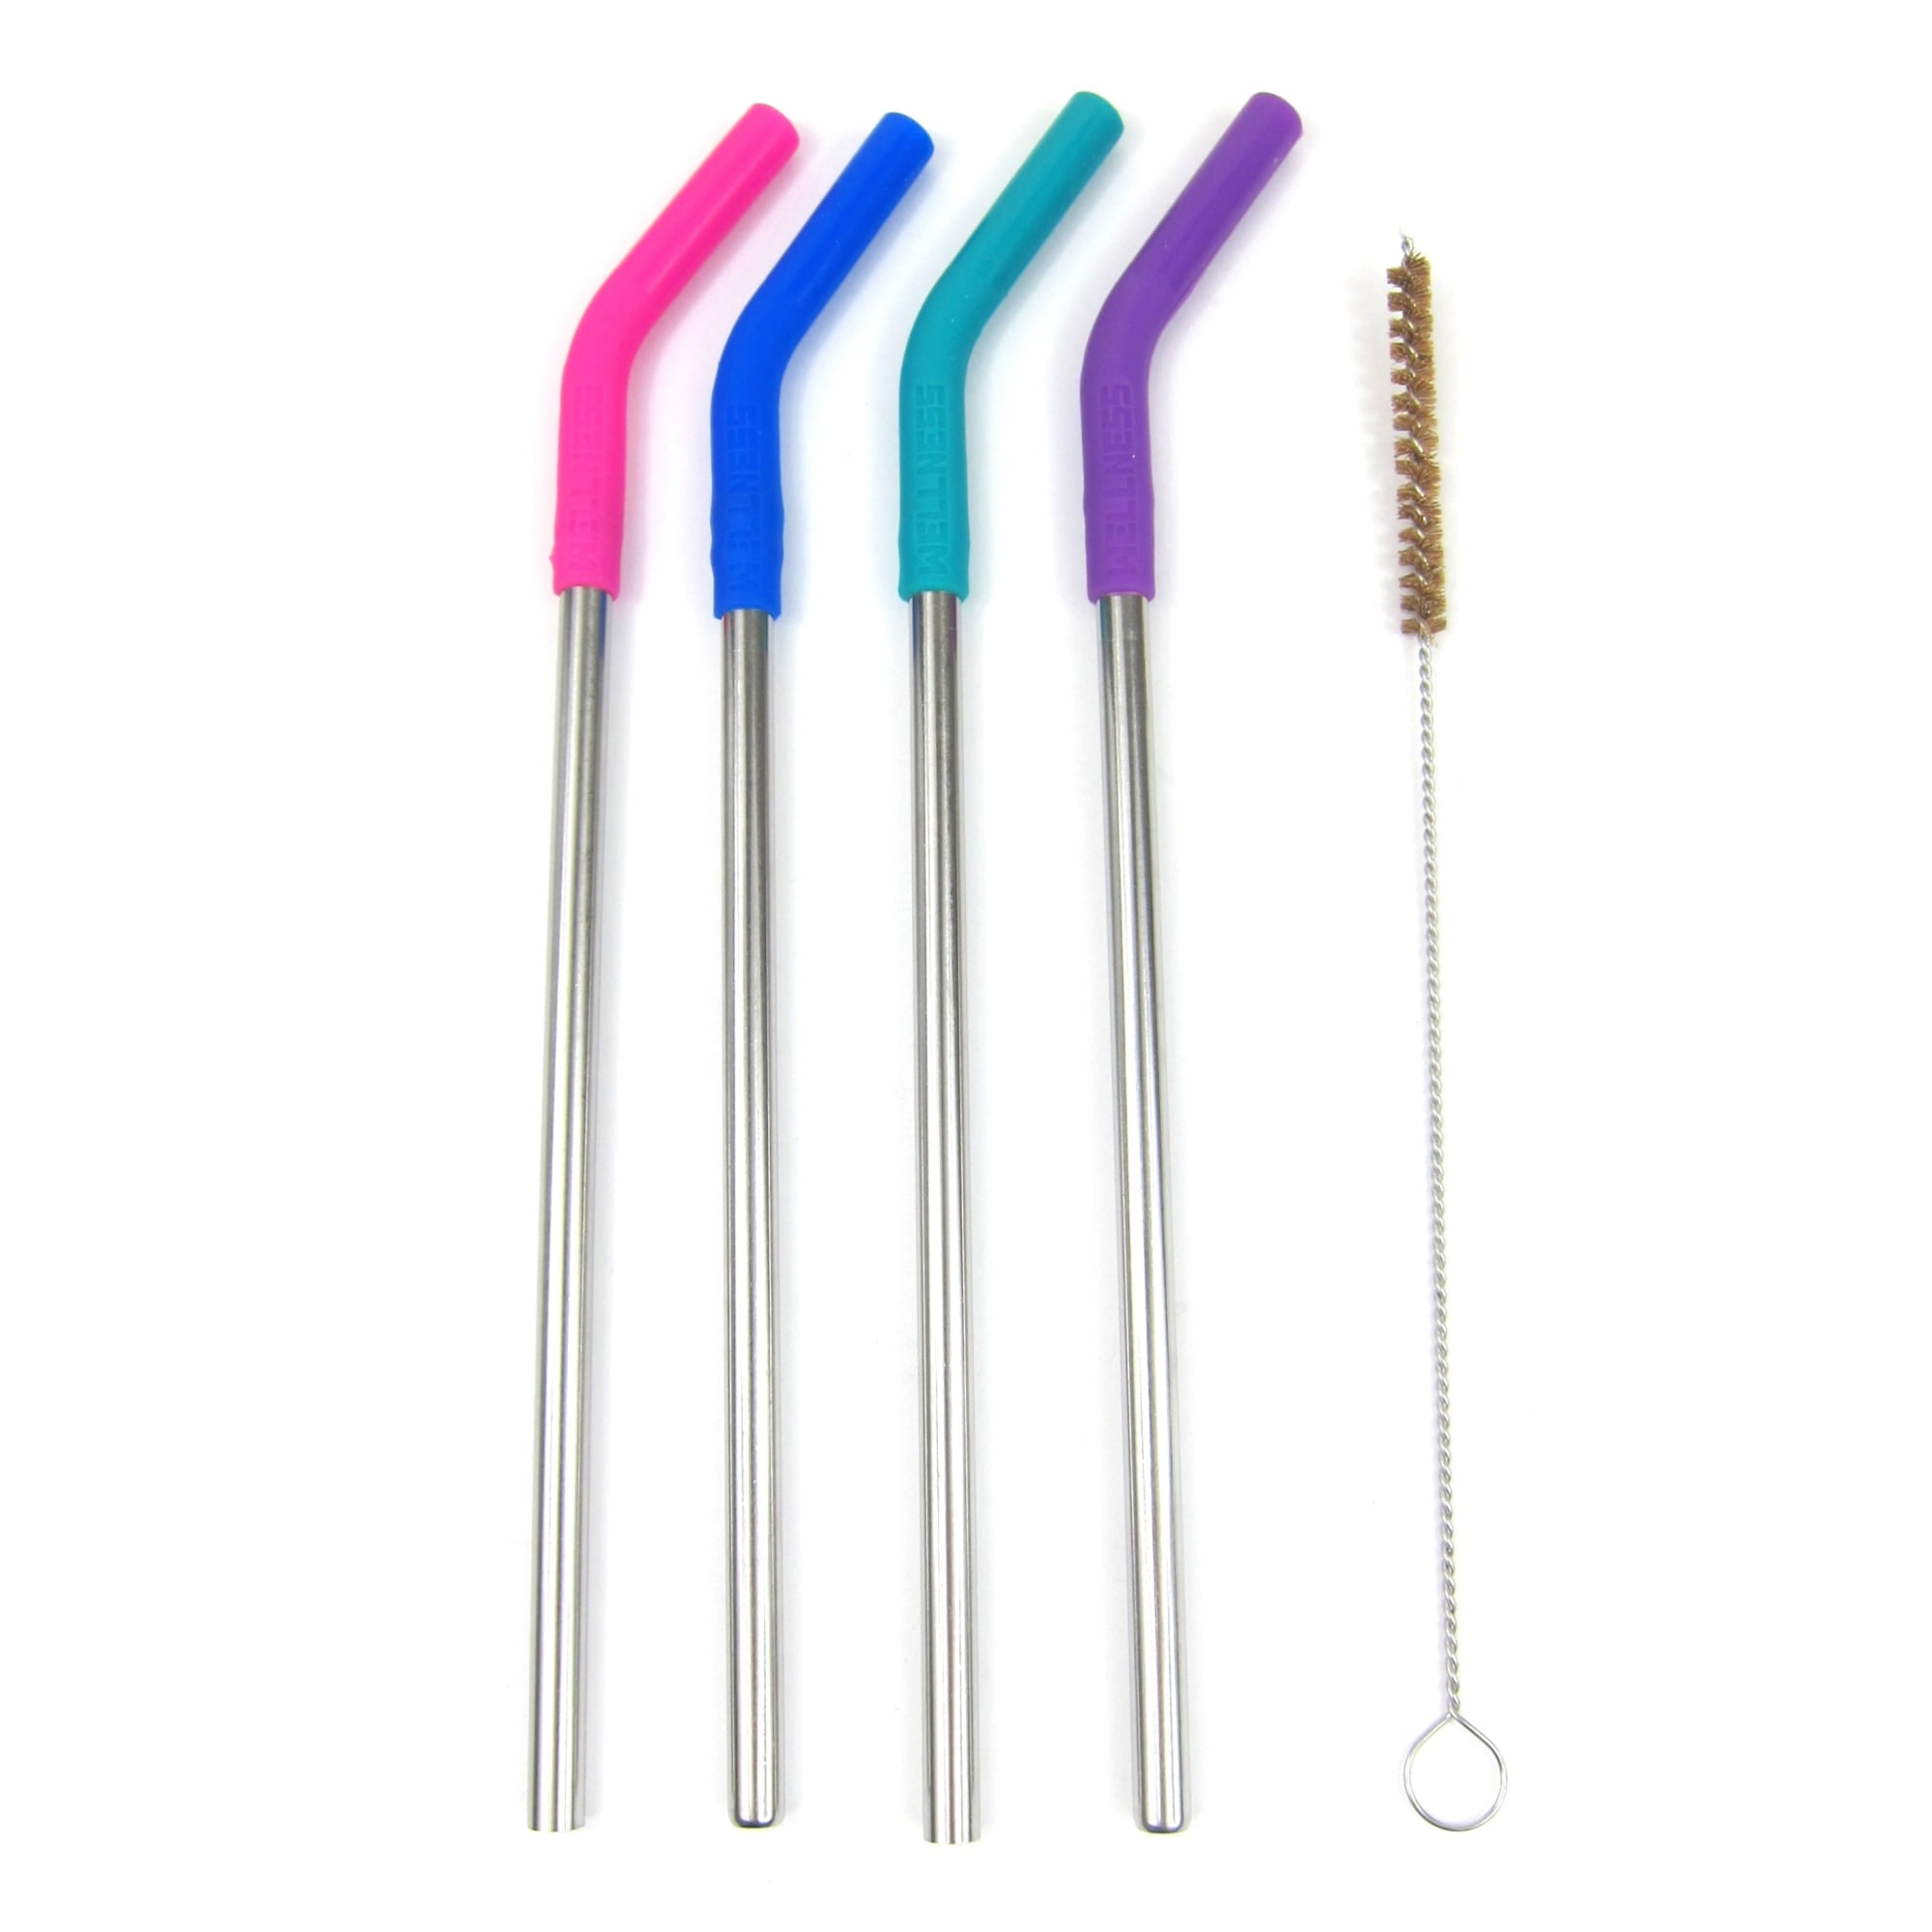 Set of 8 Stainless Steel Reusable Drinking Straws Eco Friendly w/Silicone Tips 